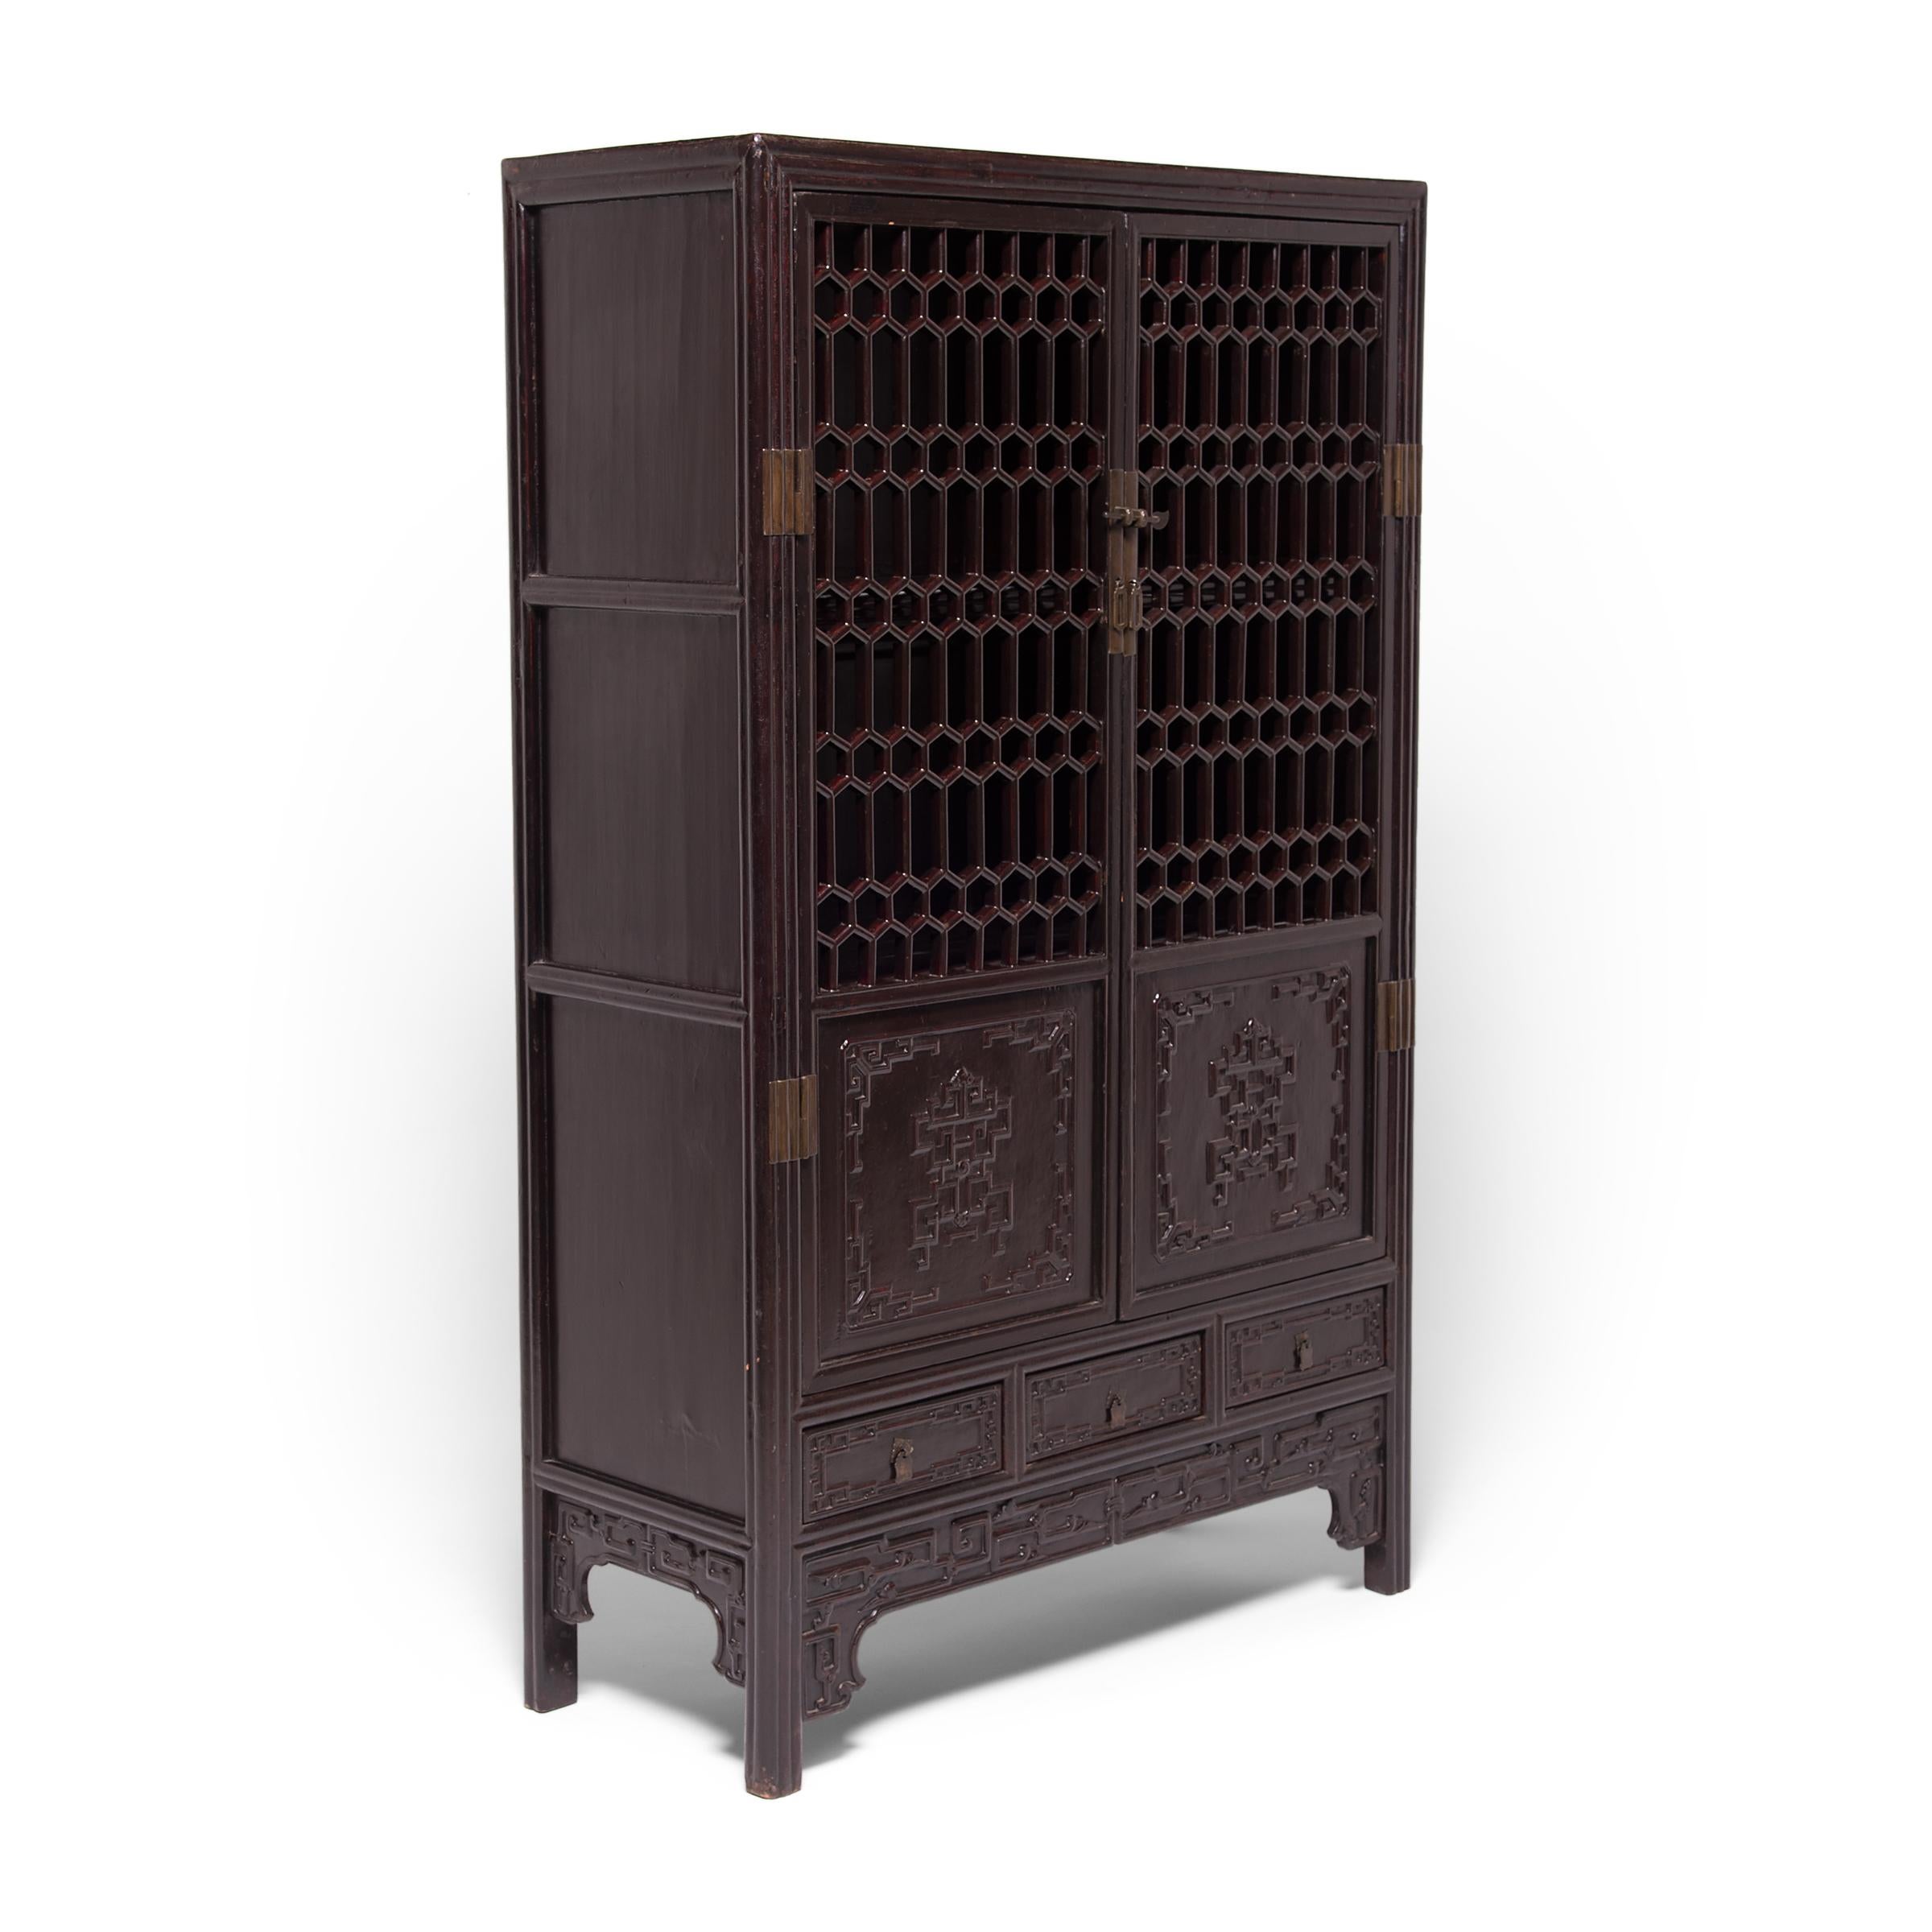 Qing Chinese Honeycomb Lattice Display Cabinet, c. 1800 For Sale